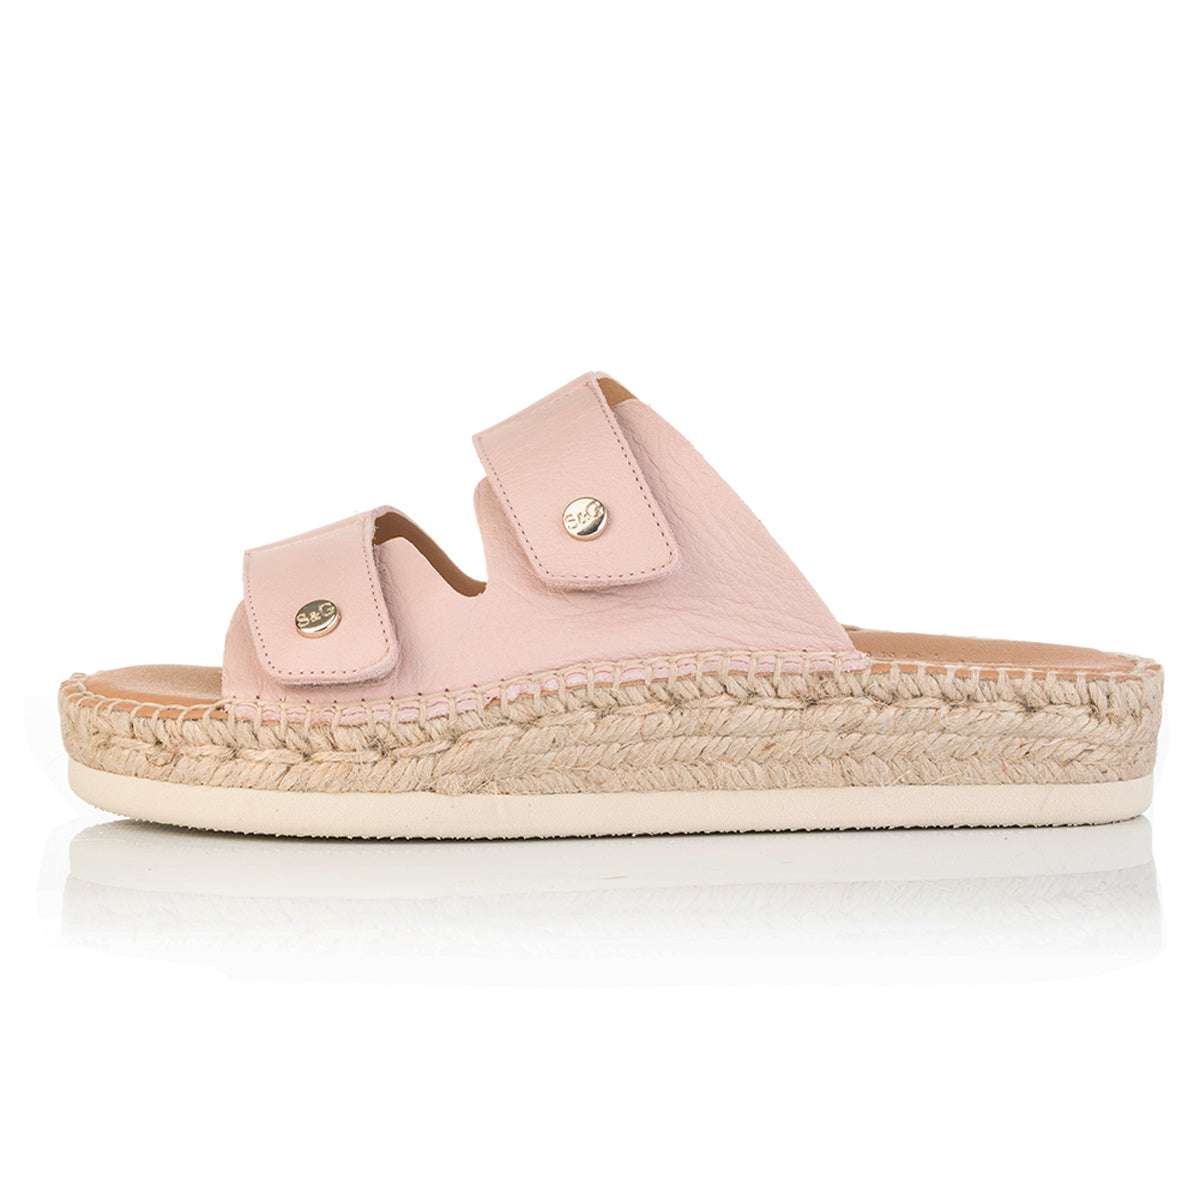 Candy - Wide Width Espadrille - Pink Leather – Sargasso and Grey